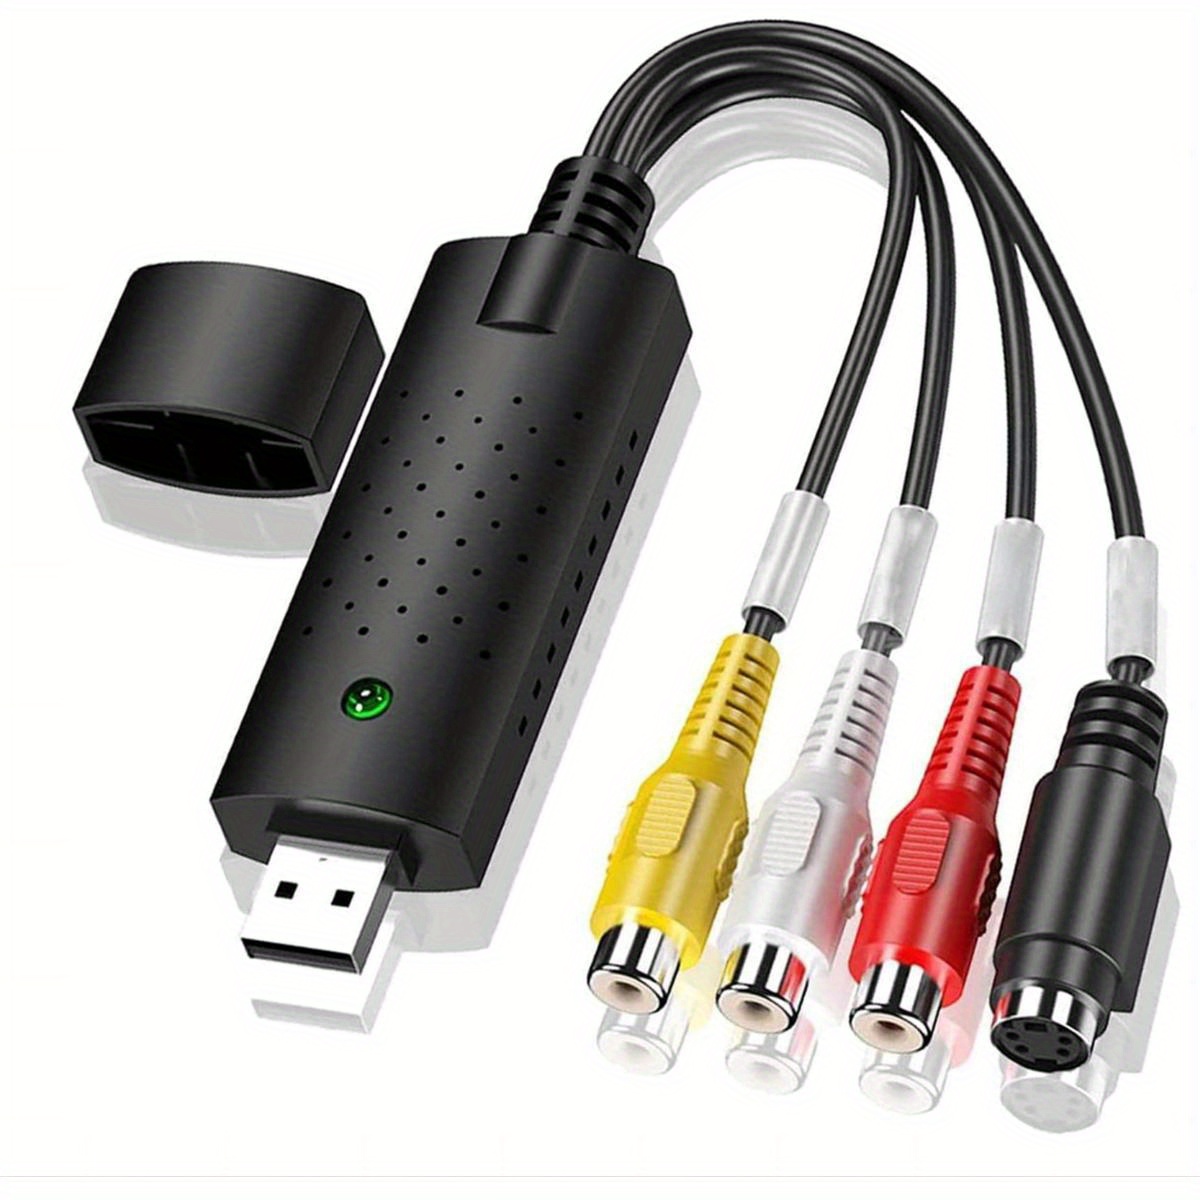 USB 2.0 VHS to Digital Converter - VHS VCR USB Video Audio Capture Card RCA  USB Video Grabber to DVD Converter Compatible with Windows 7 / 8 / 10 and